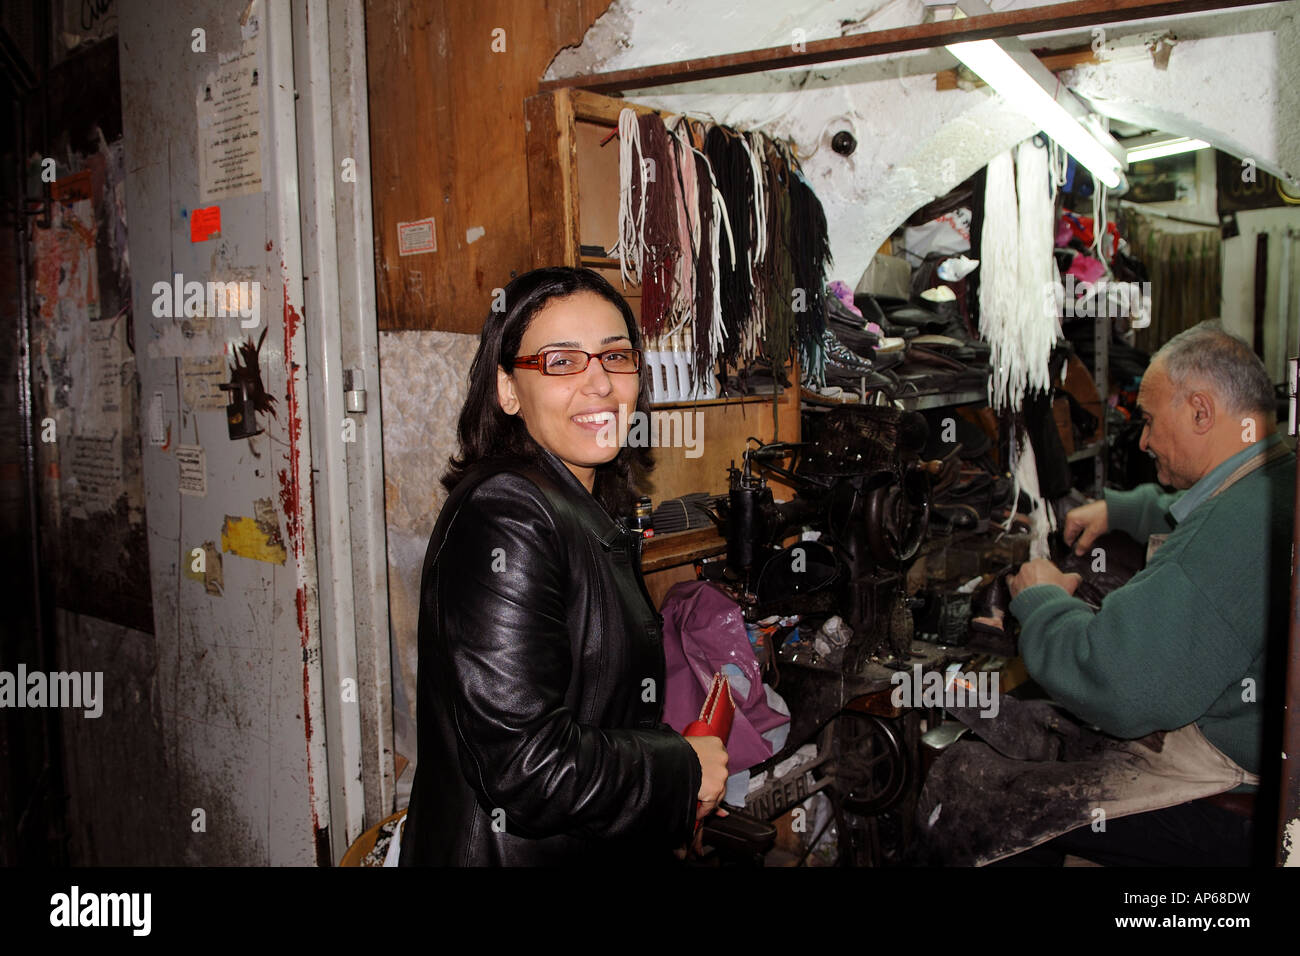 A young Arab woman visits the local tailor in the muslim quarter in the old city of Jerusalem. Stock Photo